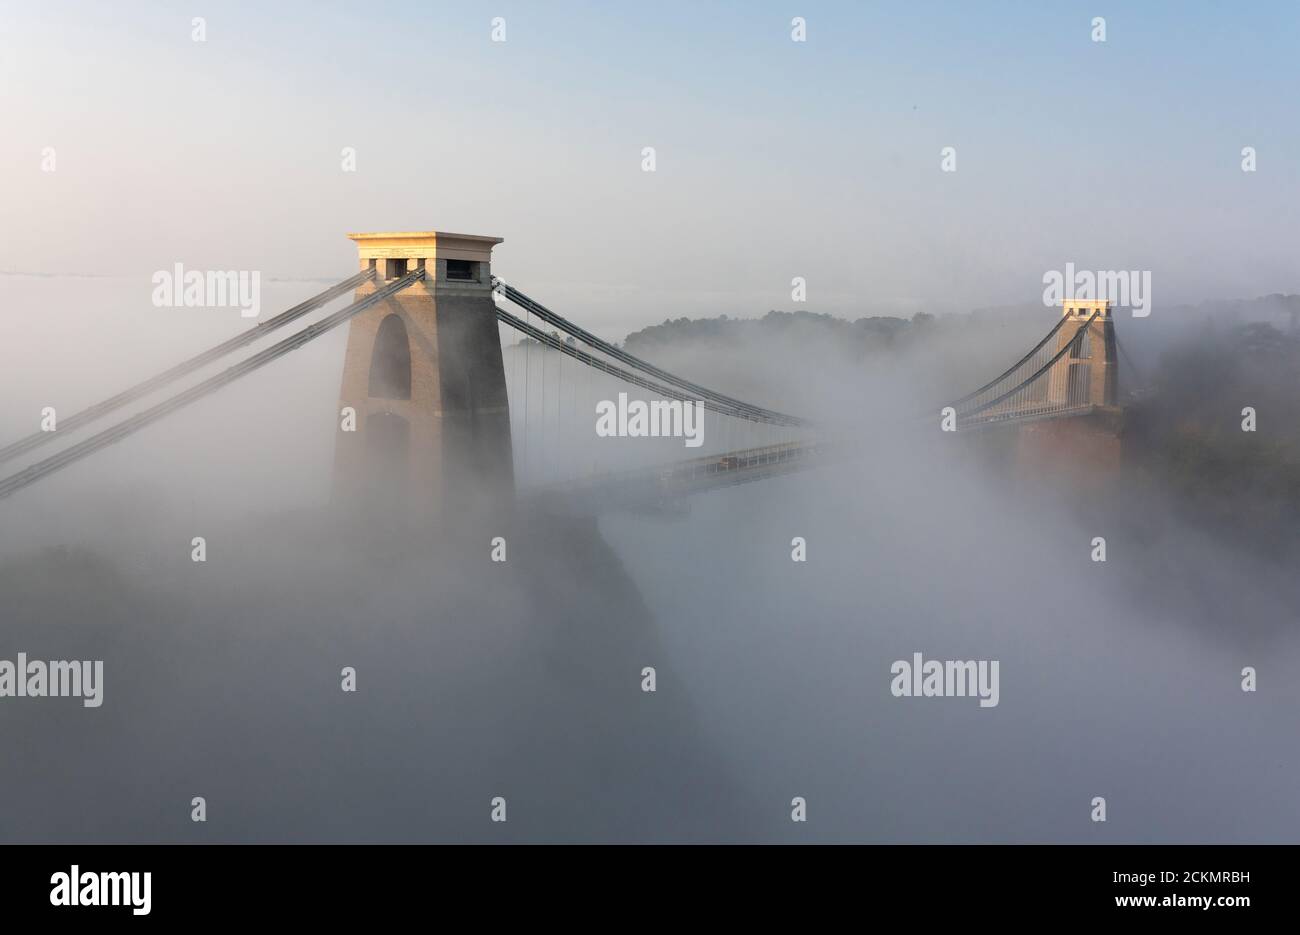 Morning inversion clouds over the Clifton Suspension Bridge in Bristol UK Stock Photo